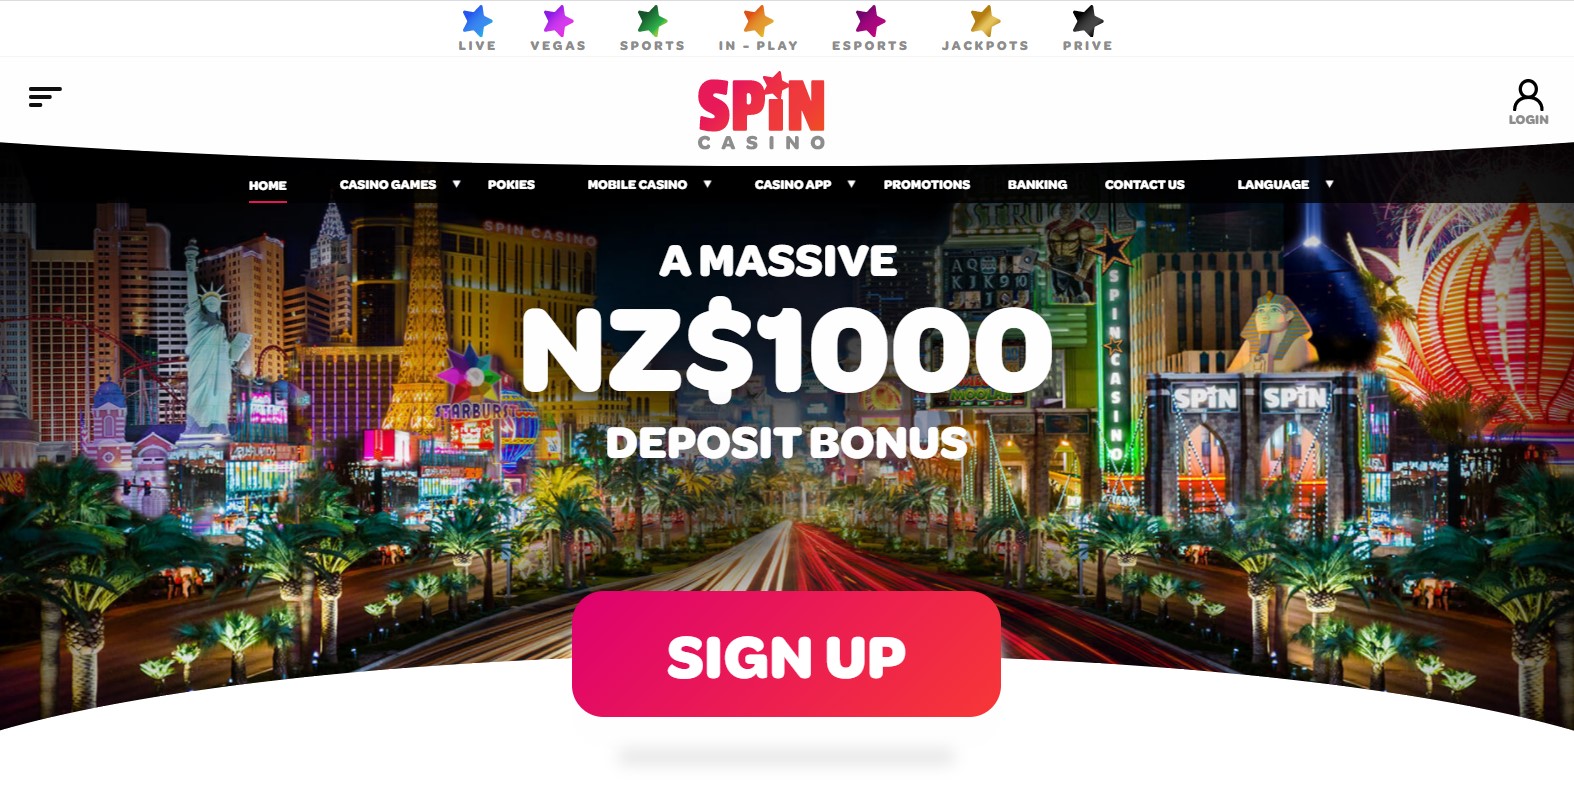 Spin Online casino landing page